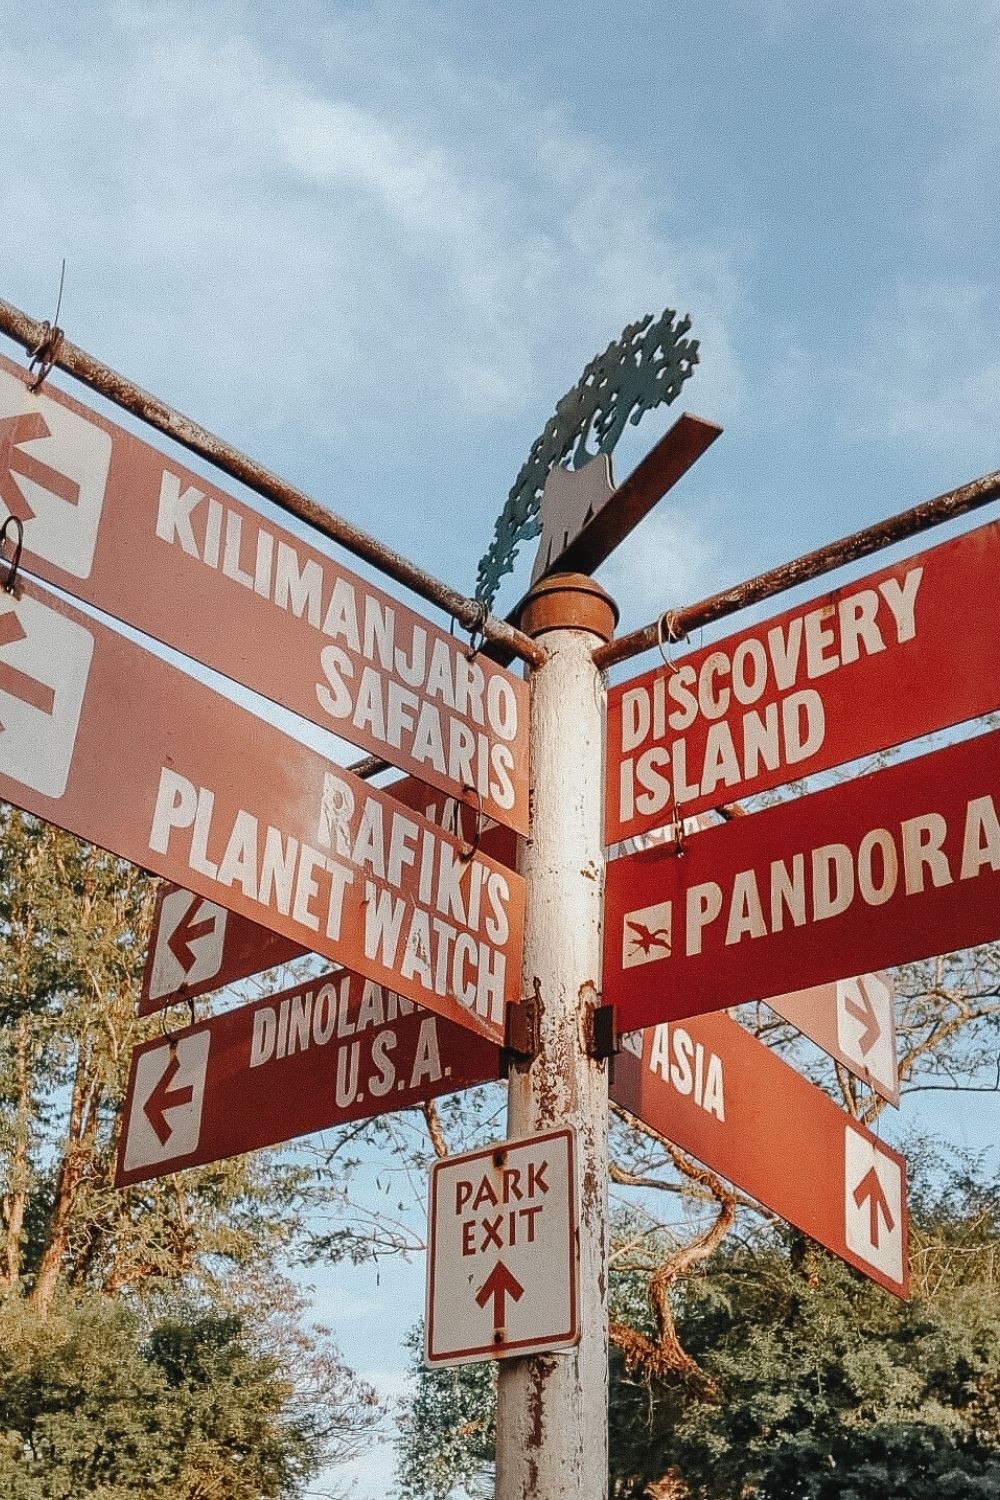 sign at Animal Kingdom giving directions to various areas of the park, including Discovery Island, Pandora, Asia, Rafiki's Planet Watch, Kilimanjaro Safaris, Dinoland USA, and park exit